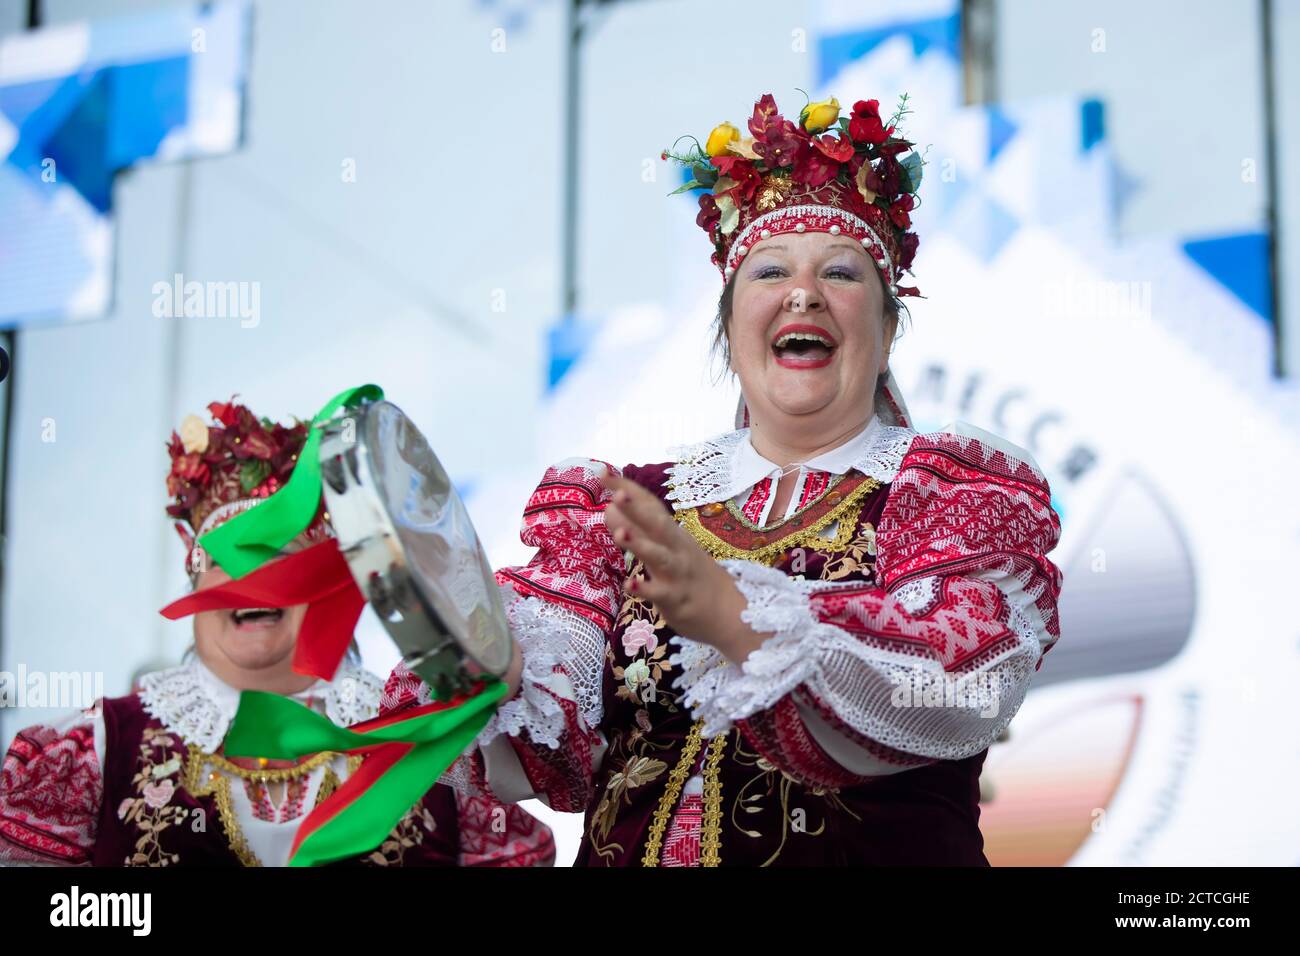 08 29 2020 Belarus, Lyaskovichi. Celebration in the city. An elderly woman in national Slavic clothes sings. Stock Photo